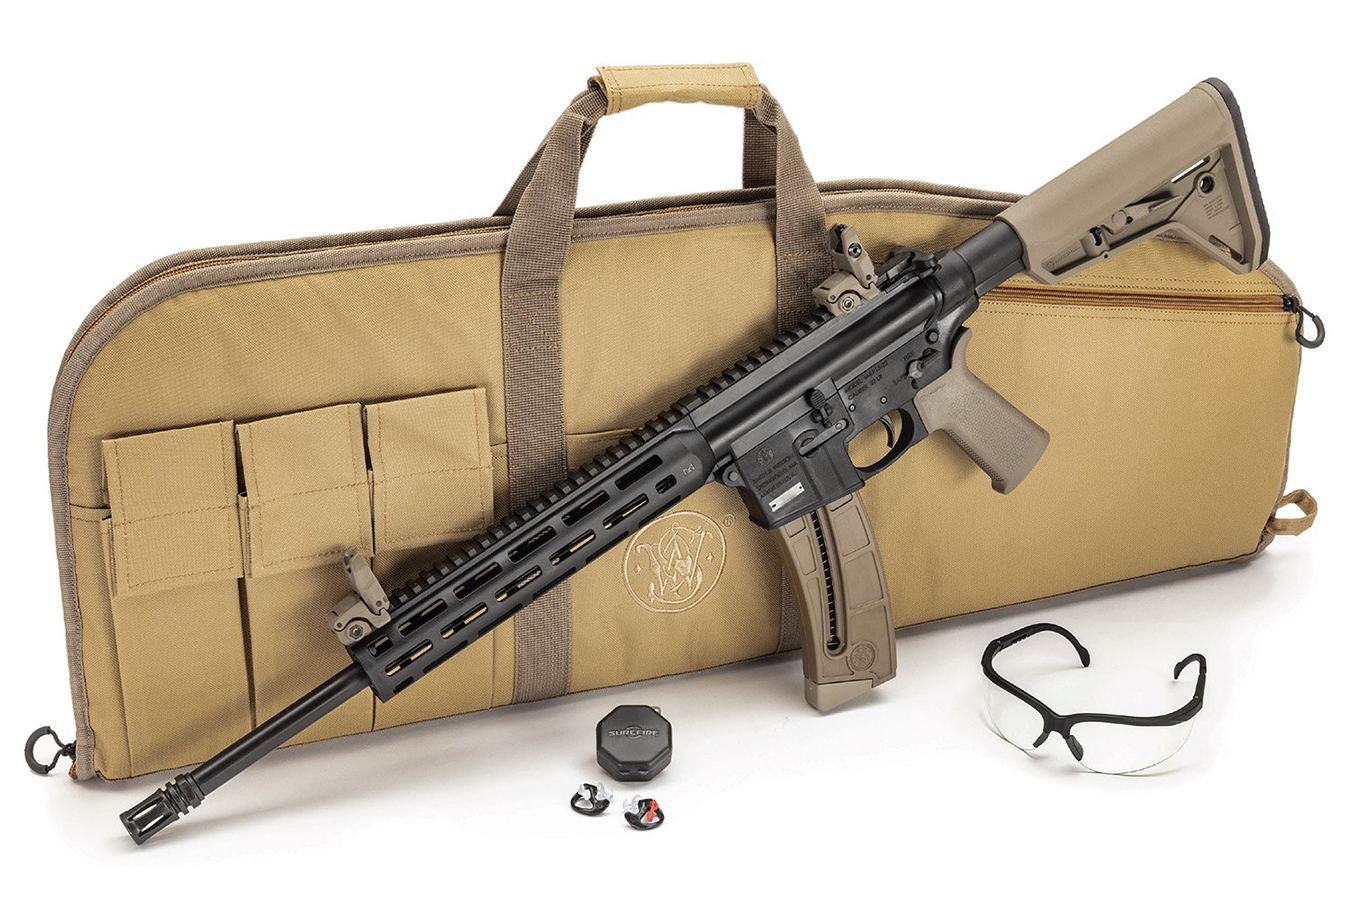 SMITH AND WESSON MP15-22 SPORT 22LR SEMI-AUTO RIFLE WITH 16.5 INCH BARREL, FDE MAGPUL FURNITURE A